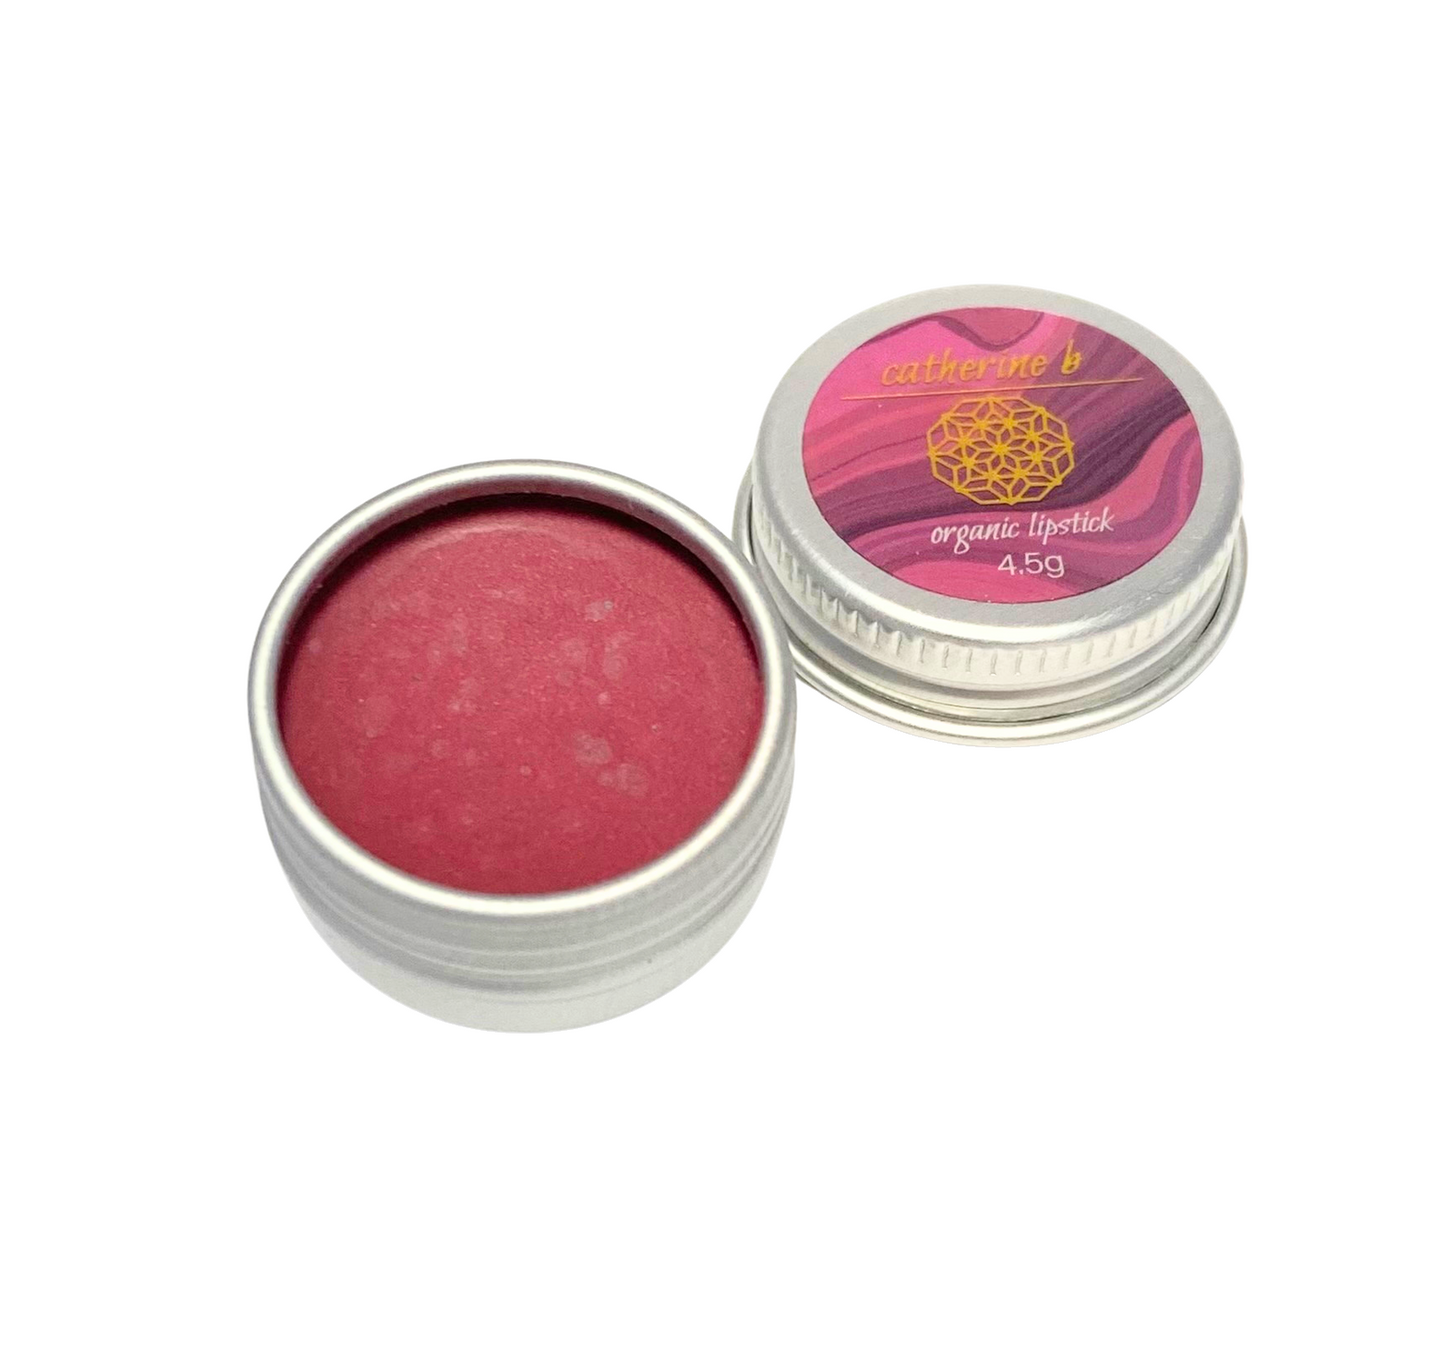 ethereal deep rose pink lipstick in aluminium tin on a white background 